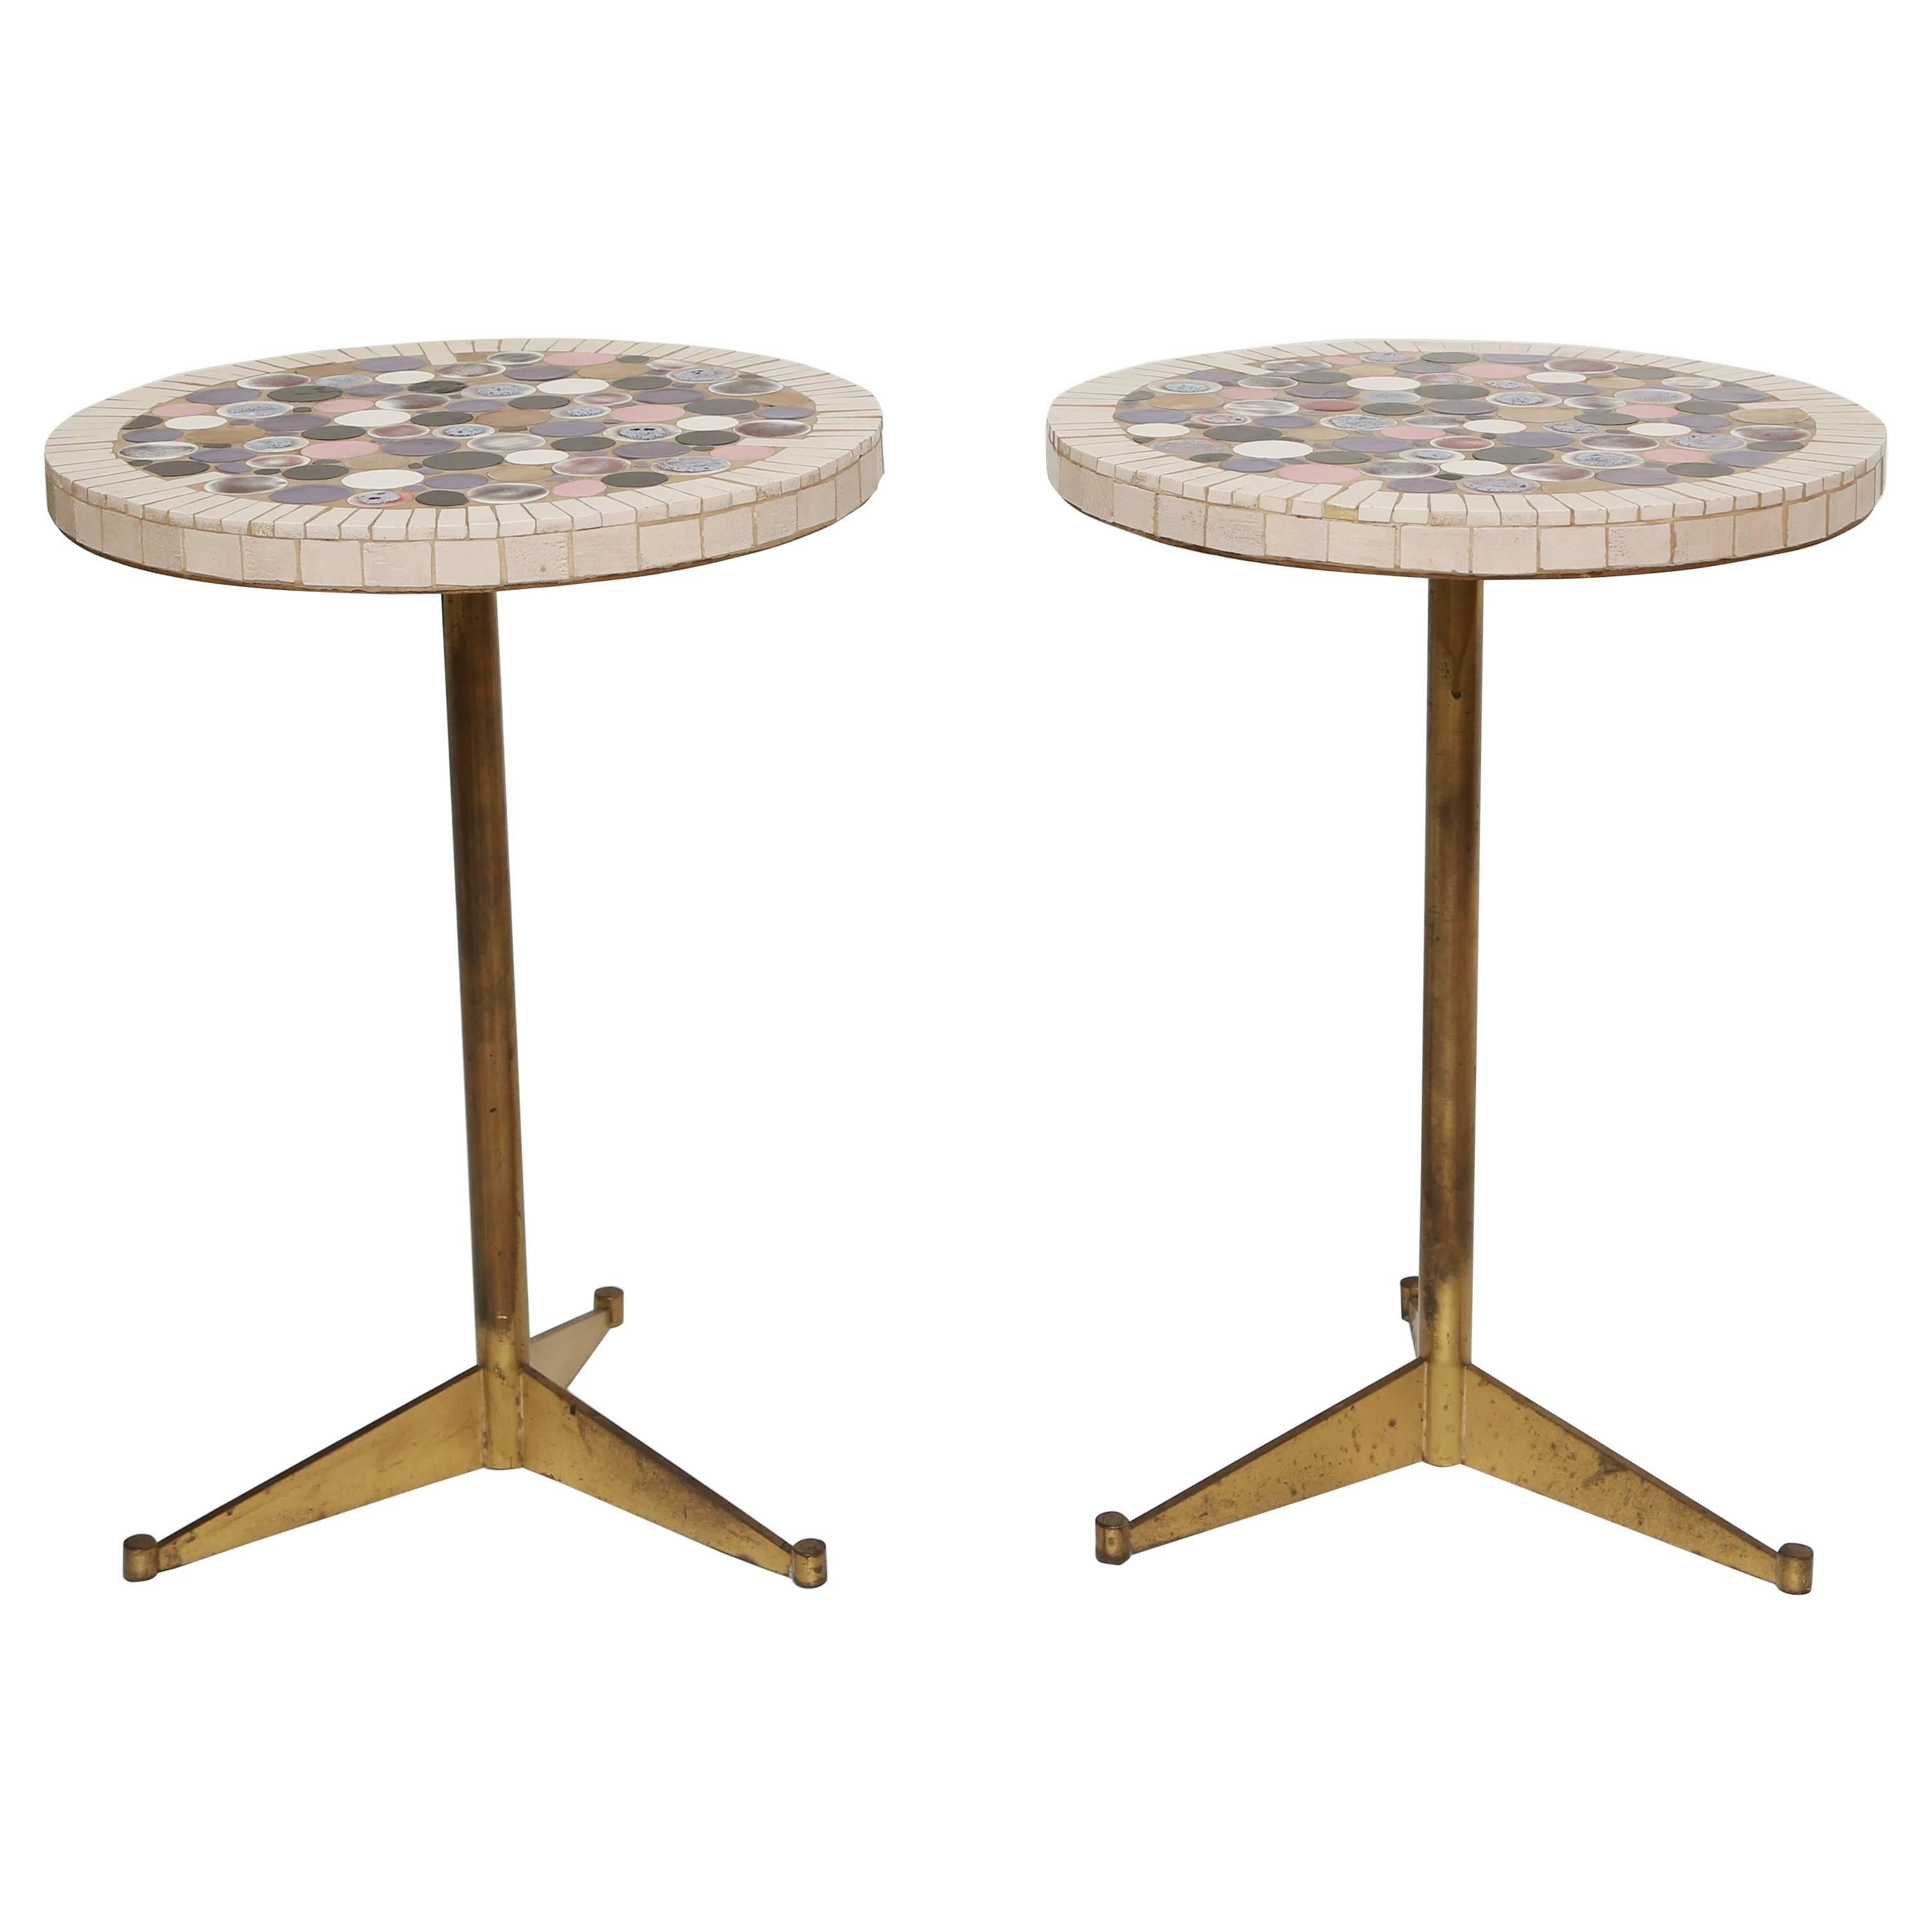 Peter Pepper Products Tile Tables